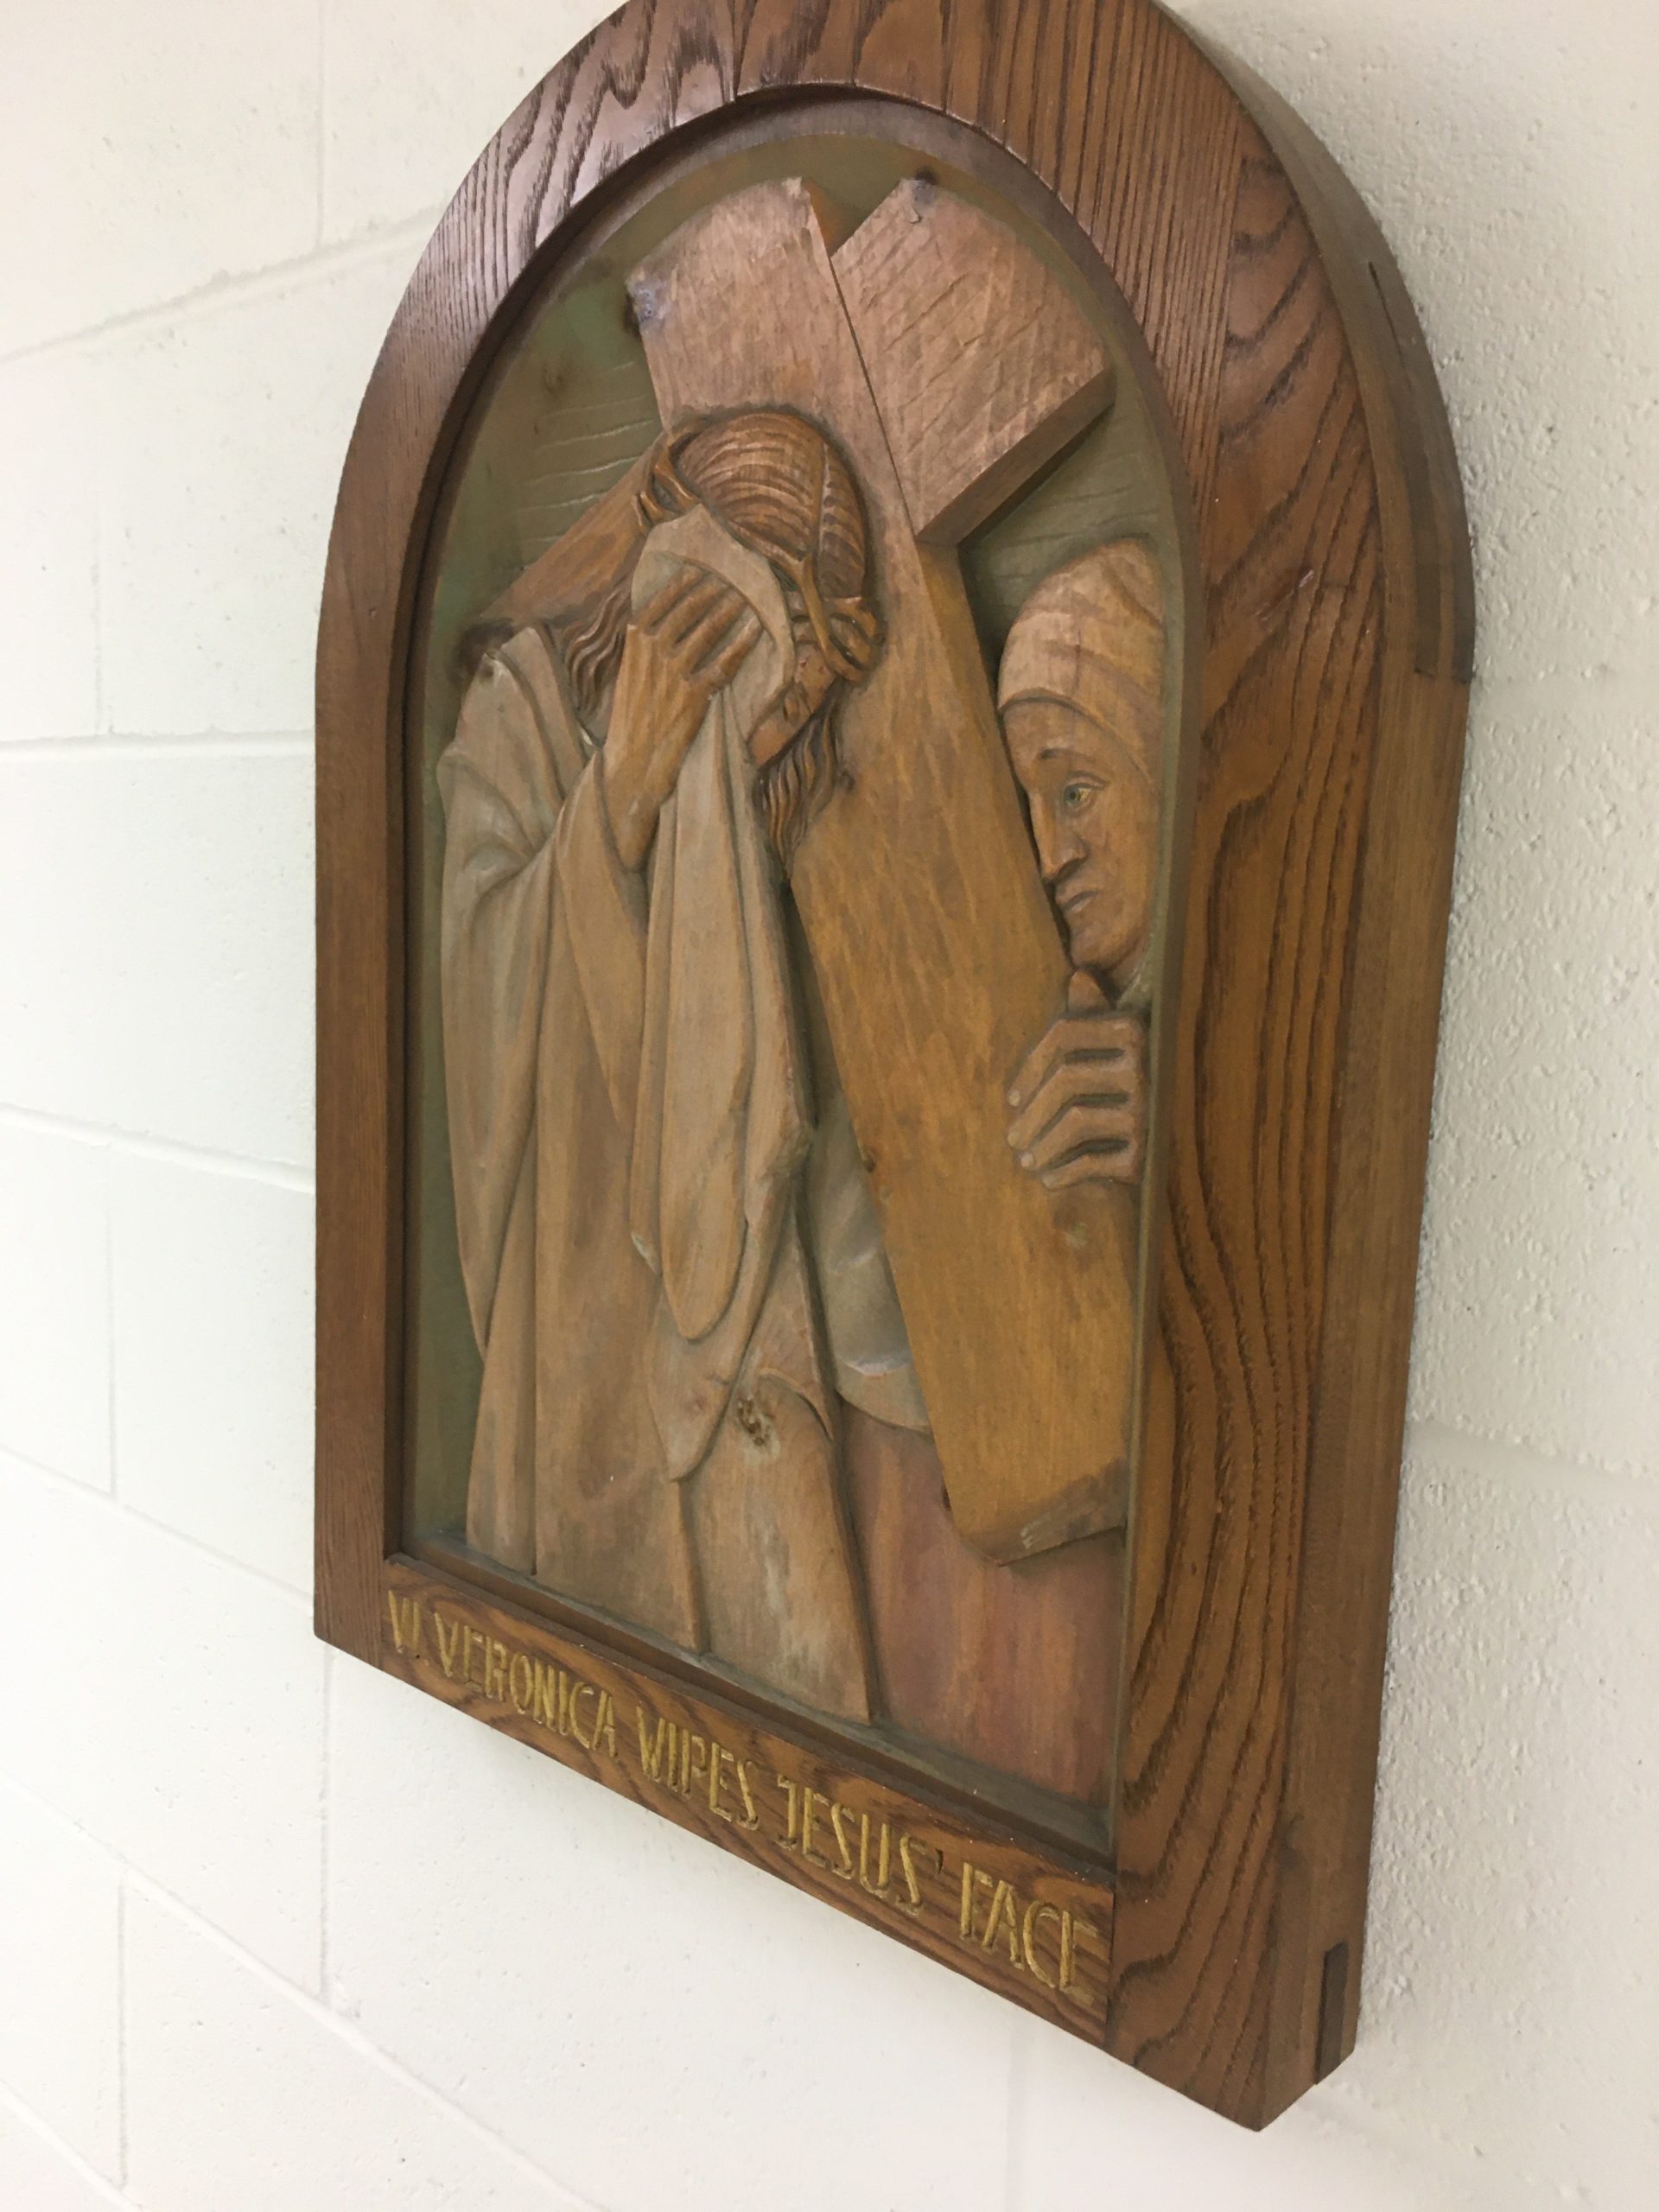 One of the Stations of the Cross, now a centerpiece at Mater Dei Apostolate